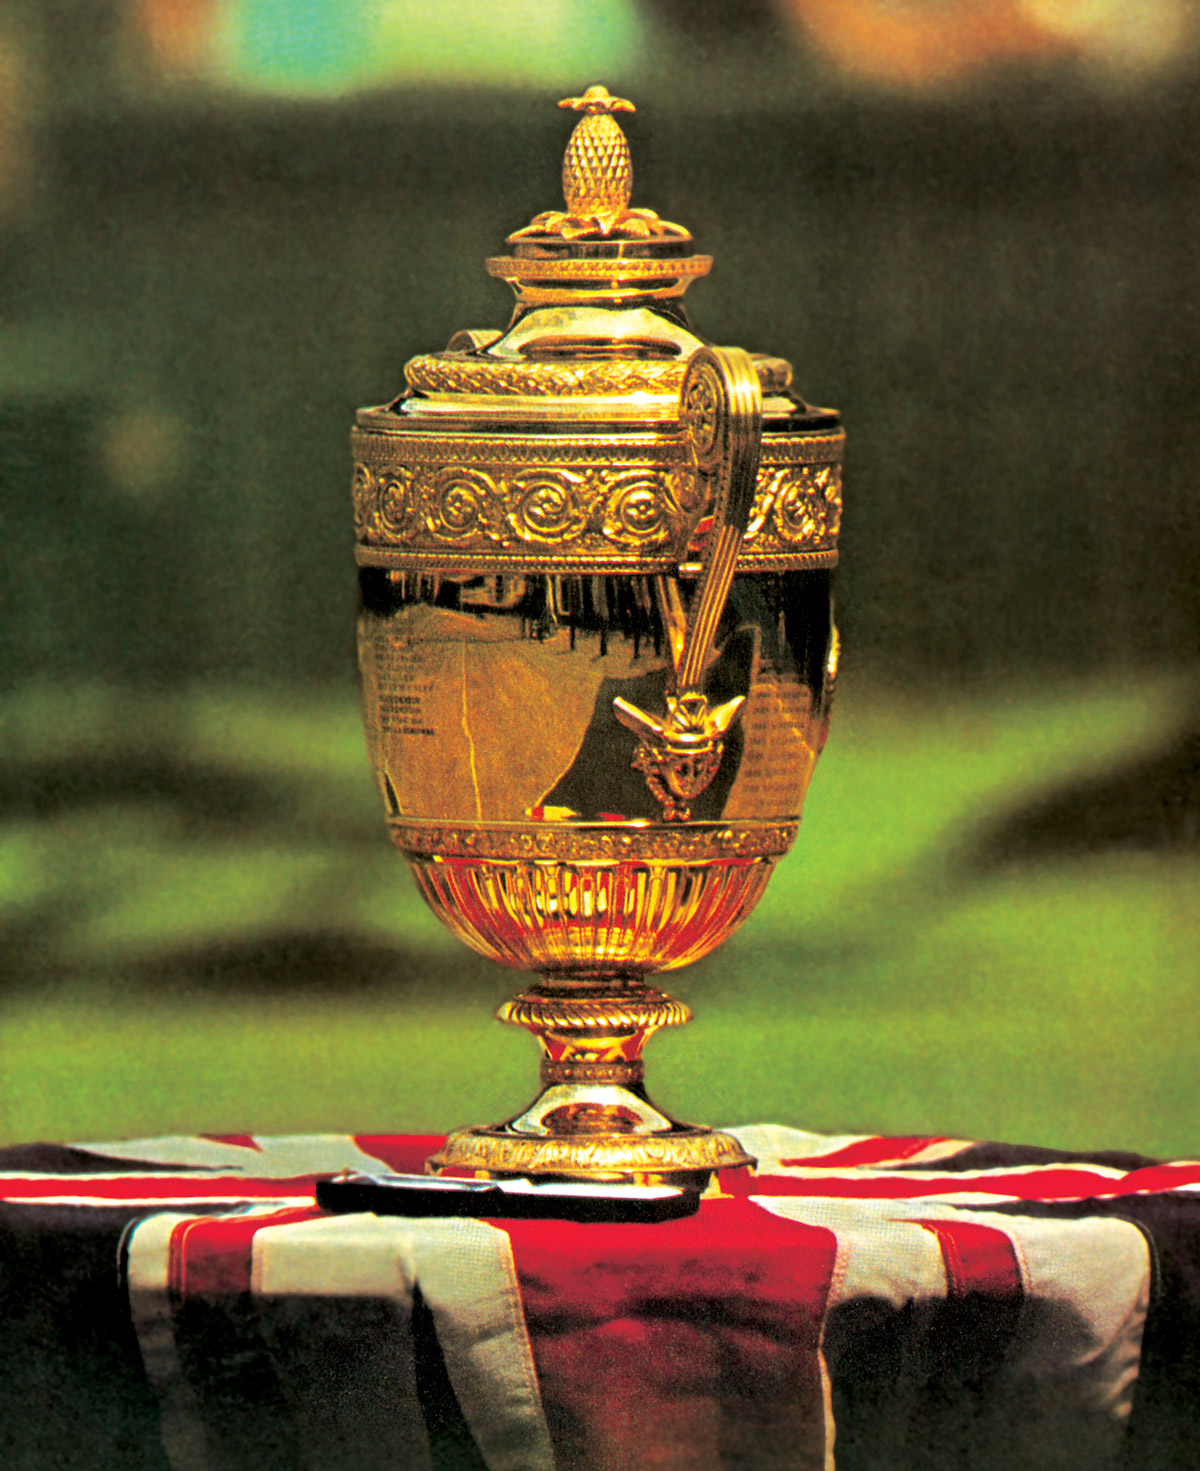 A photograph of the Wimbledon Challenge Cup, awarded to the men’s singles champion, which bears a pineapple at its apex.